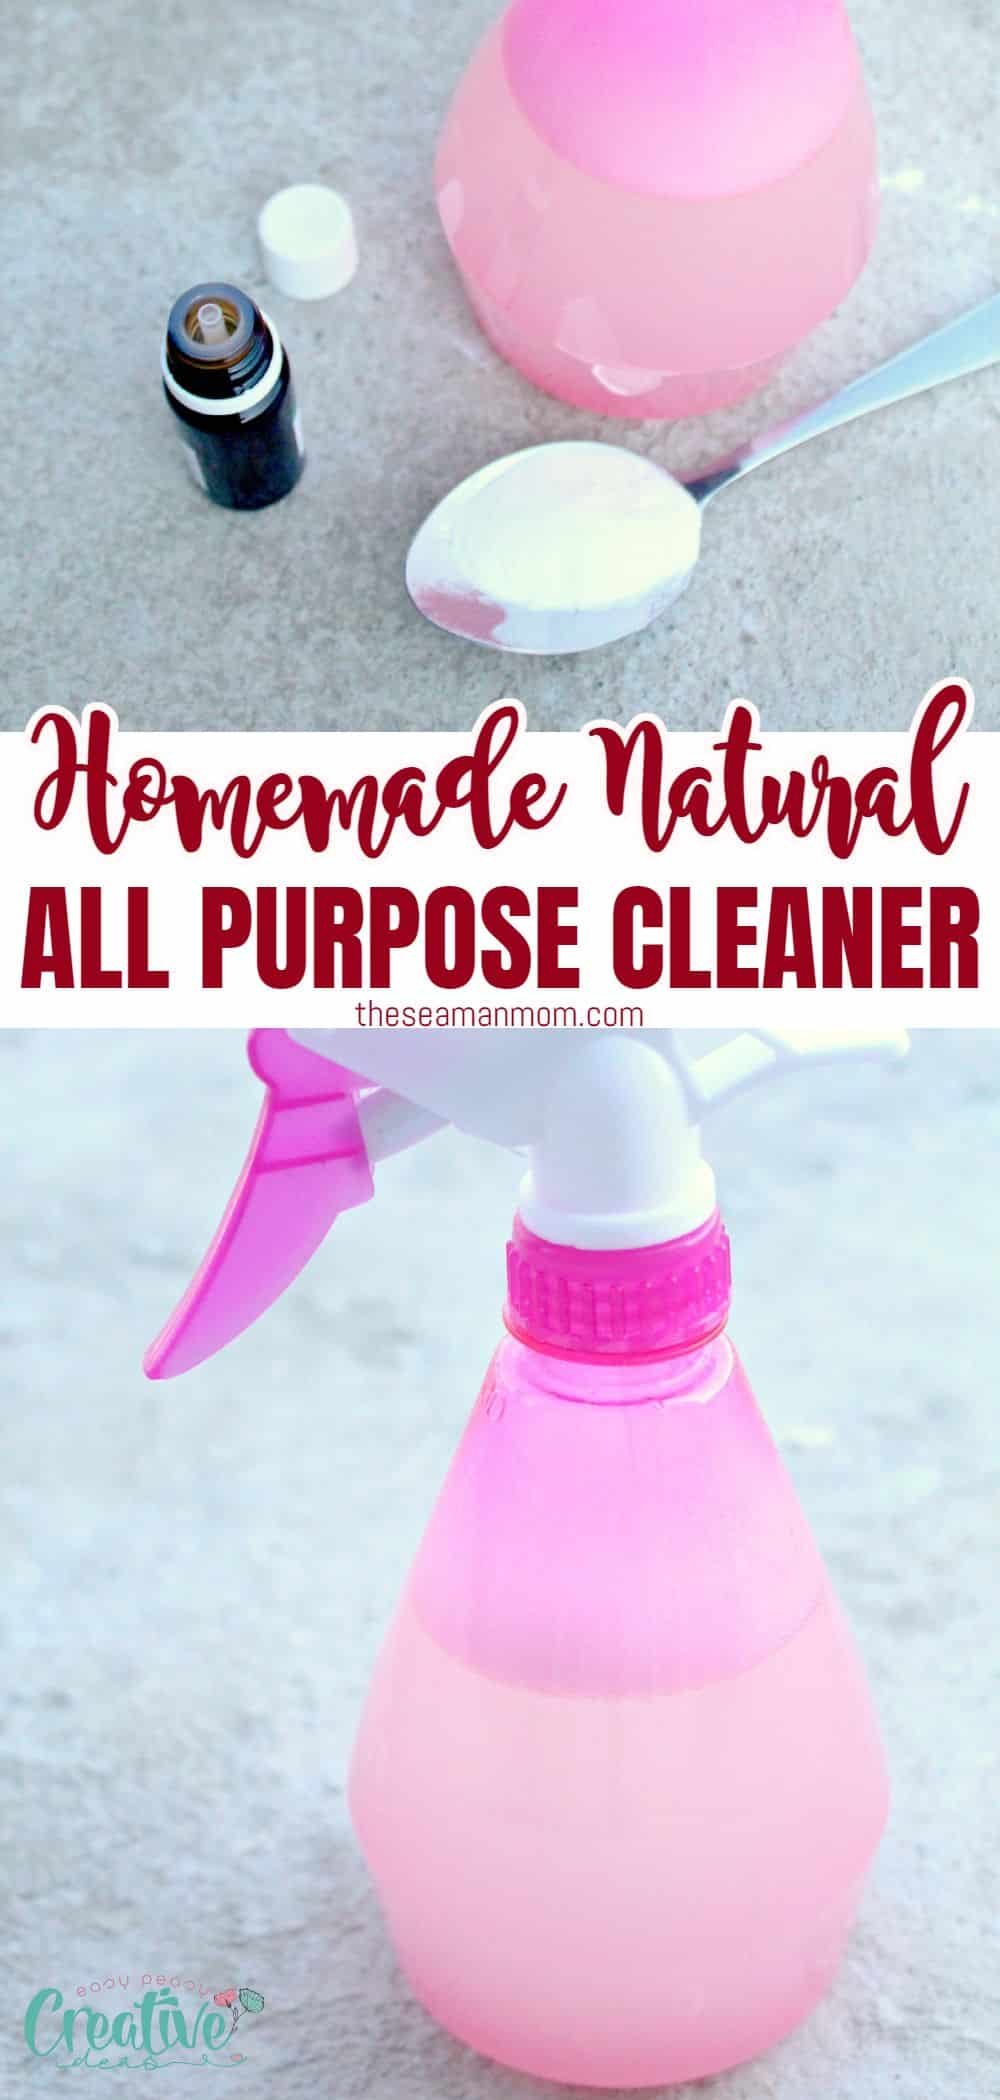 Stop buying store-bought cleaners and make your own natural DIY all purpose cleaner with ingredients you likely already have in your home. It is easy to prepare, yet has remarkable cleaning power! via @petroneagu